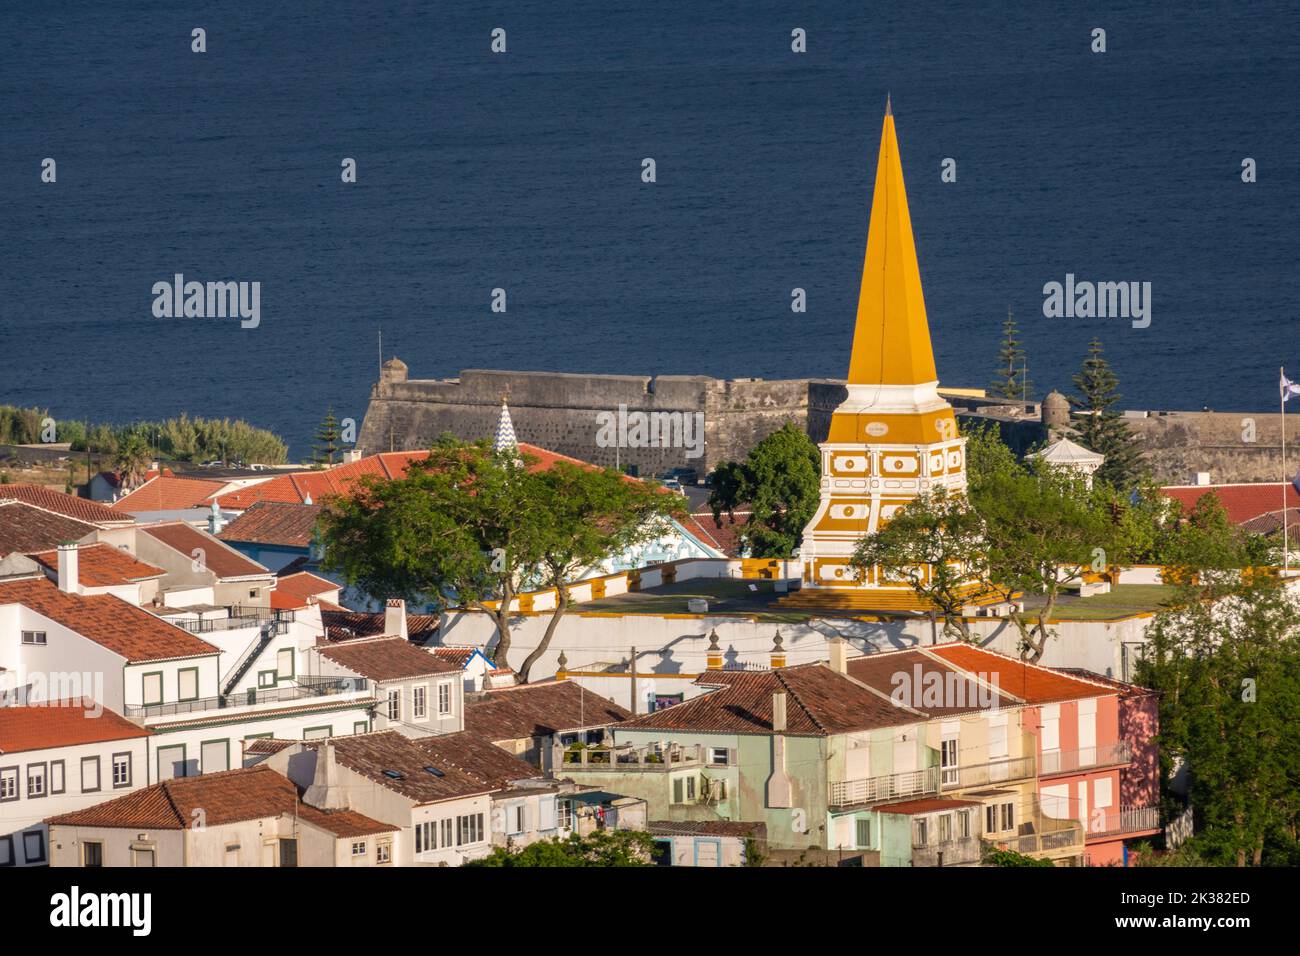 Outeiro da Memoria, a monument erected in honor of King Pedro IV in 1846, dominates the skyline looking toward the Bay of Angra in Angra do Heroismo, Terceira Island, Azores, Portugal. Stock Photo